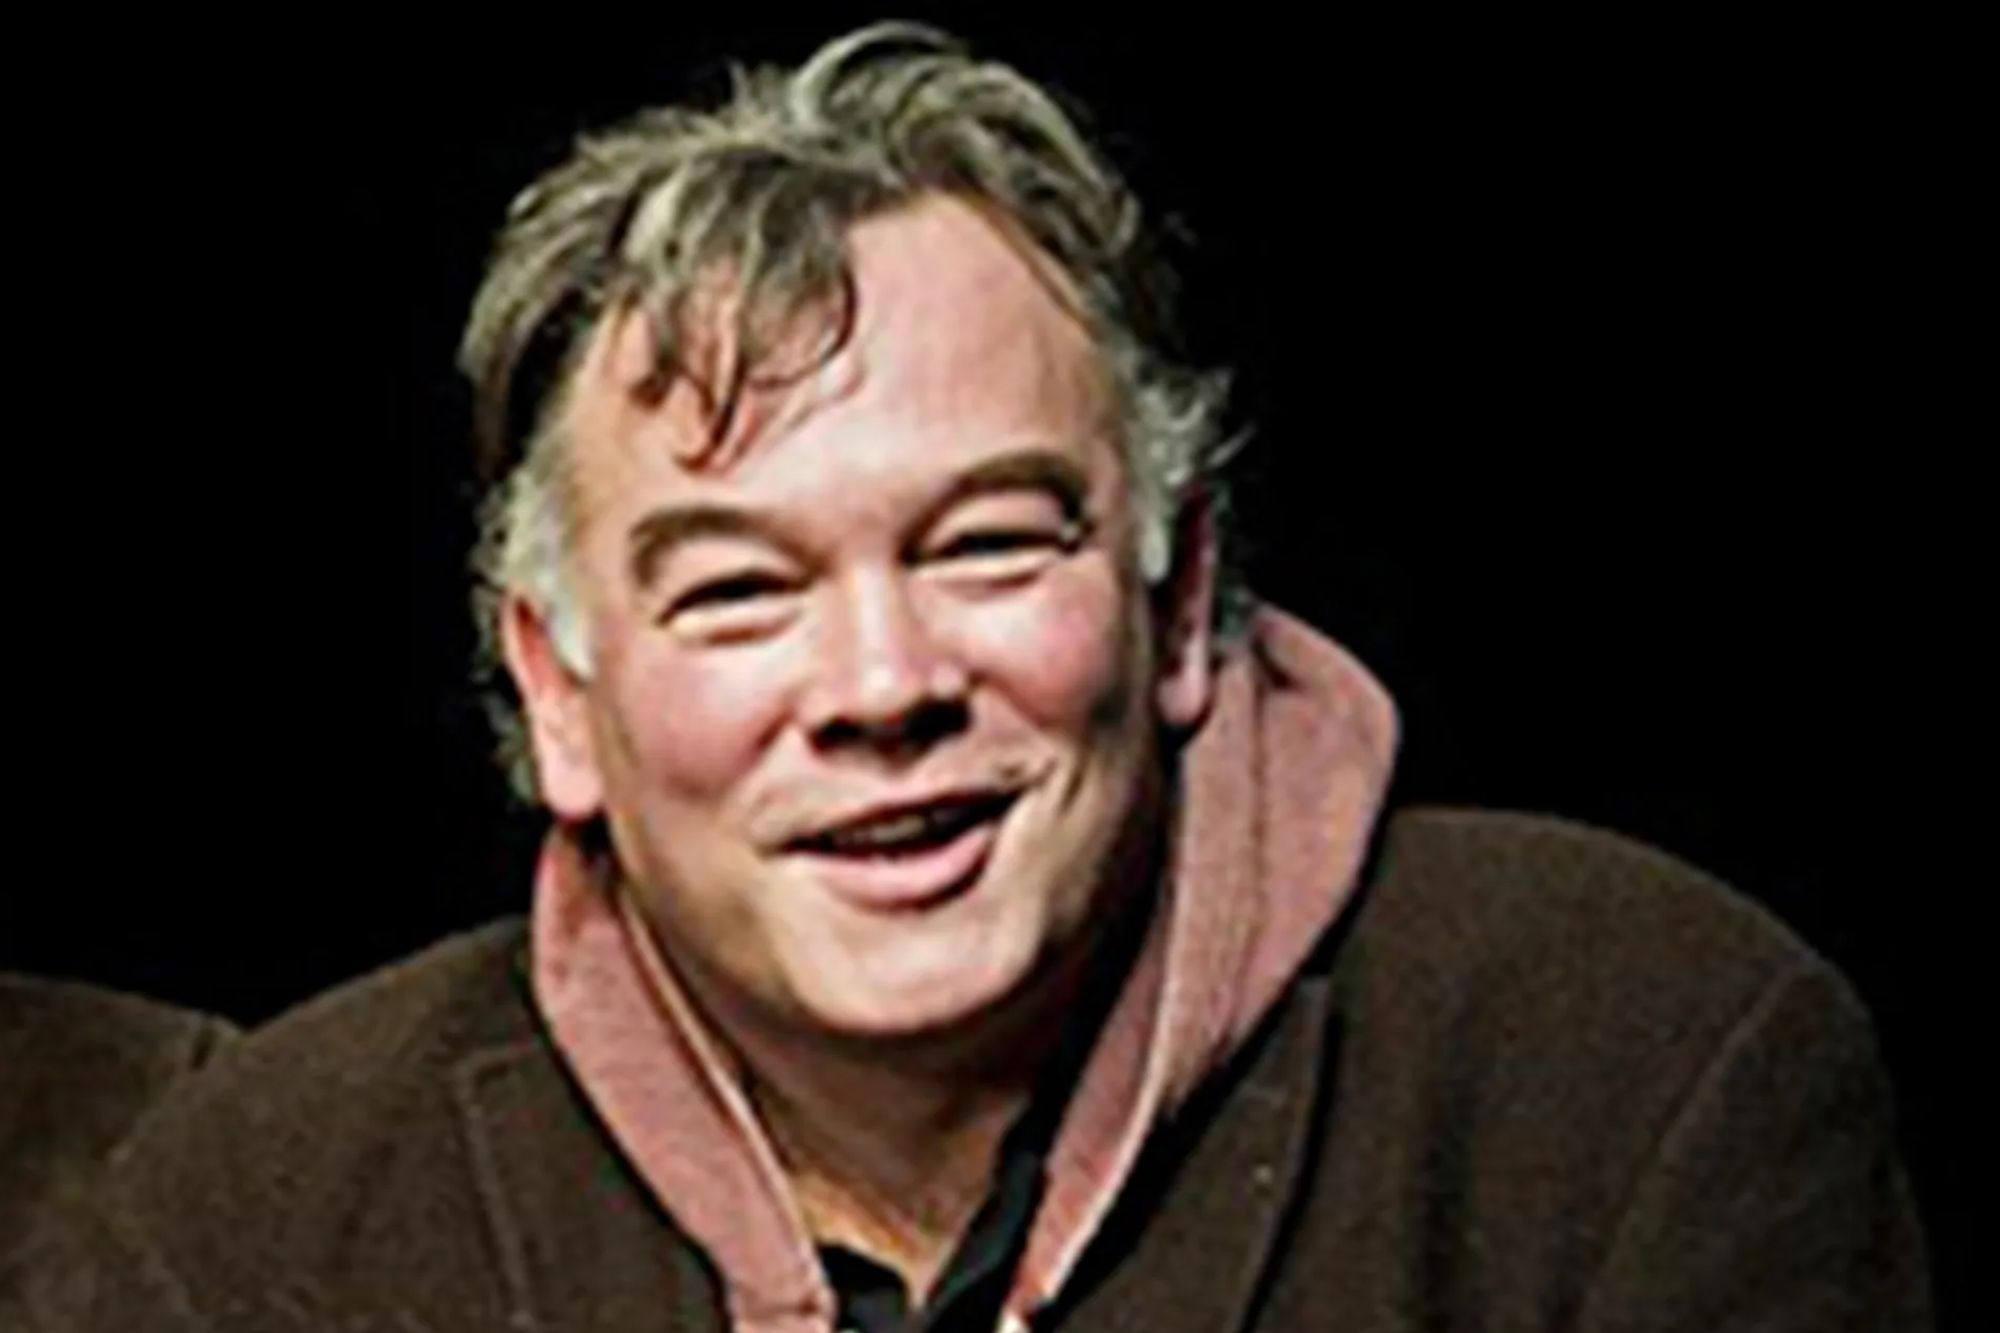 Stand-up comedian Stewart Lee splits from wife of 17 years